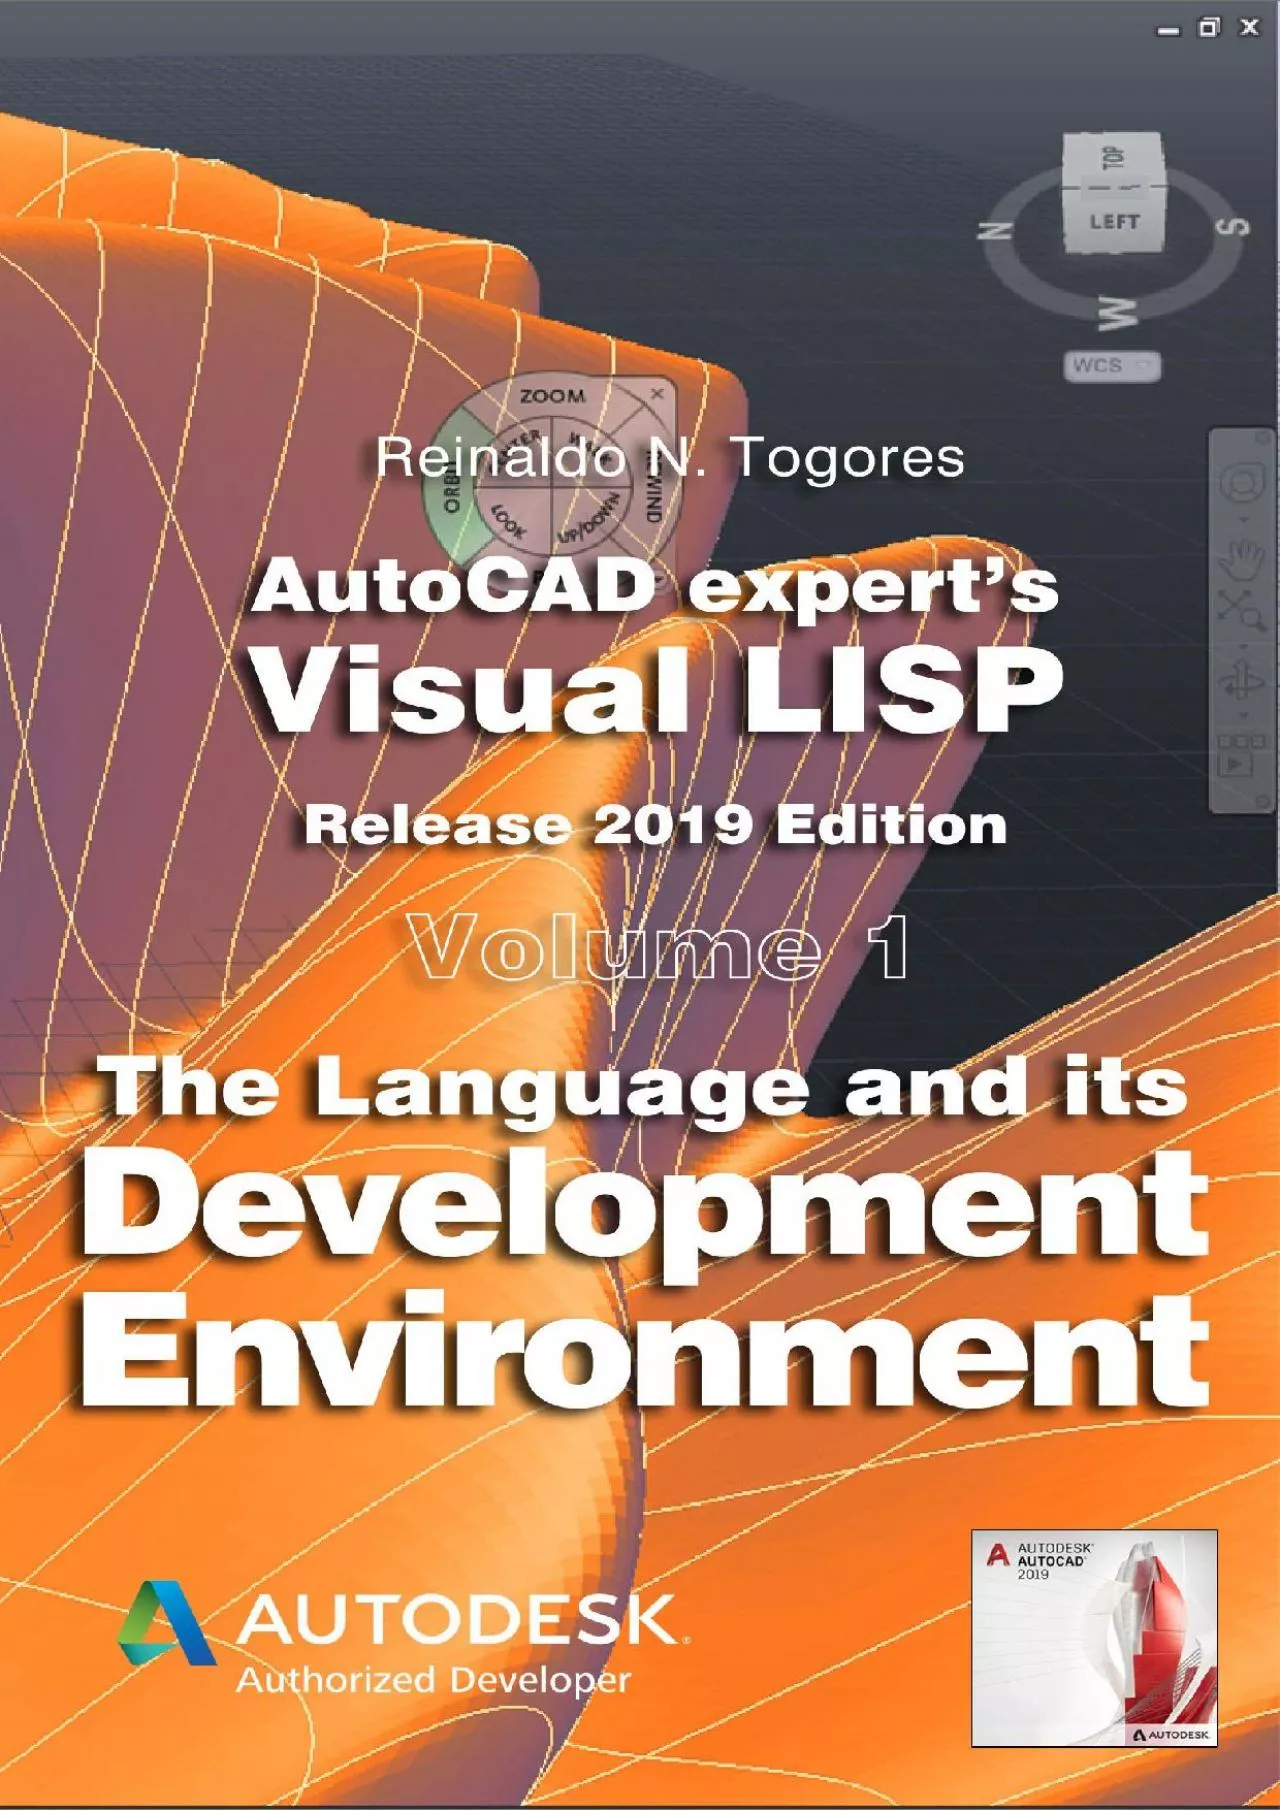 [eBOOK]-The Language and its Development Environment Release 2019 edition (AutoCAD expert\'s